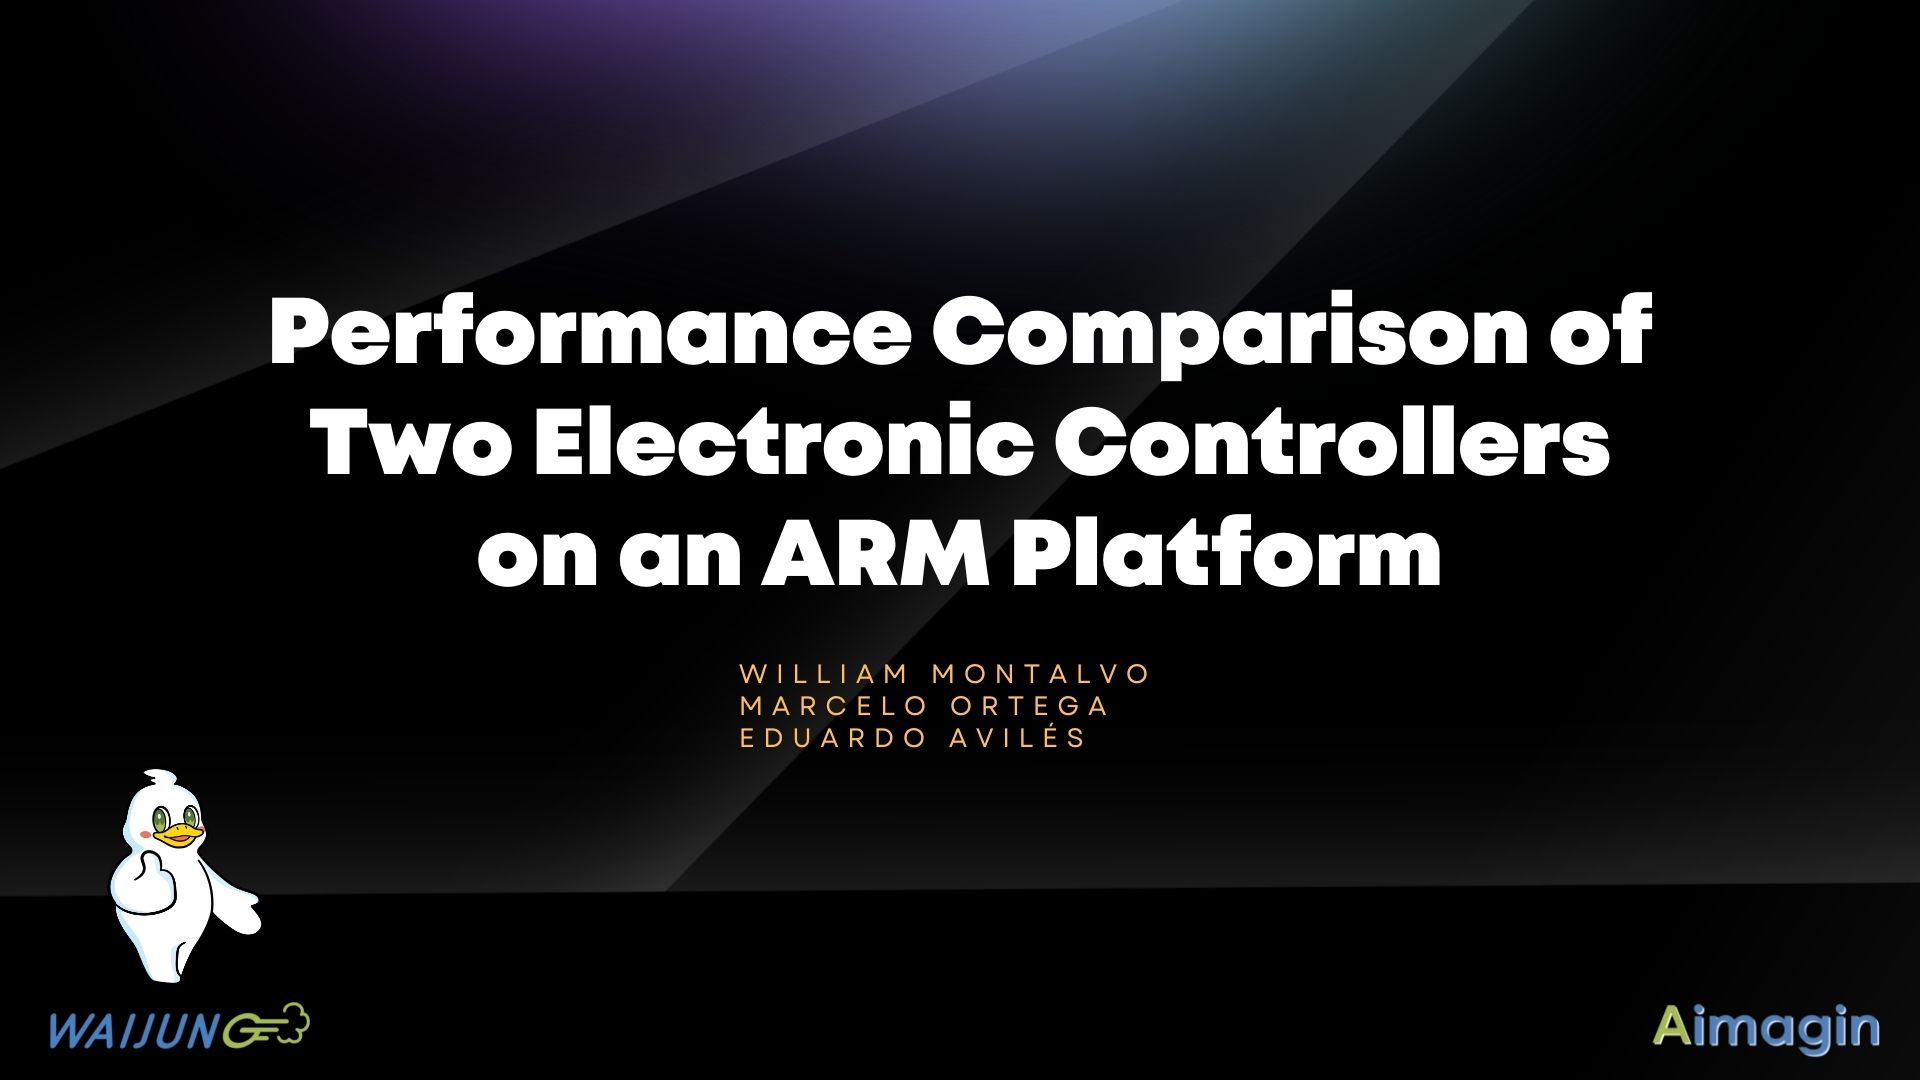 Performance Comparison of Two Electronic Controllers on an ARM Platform